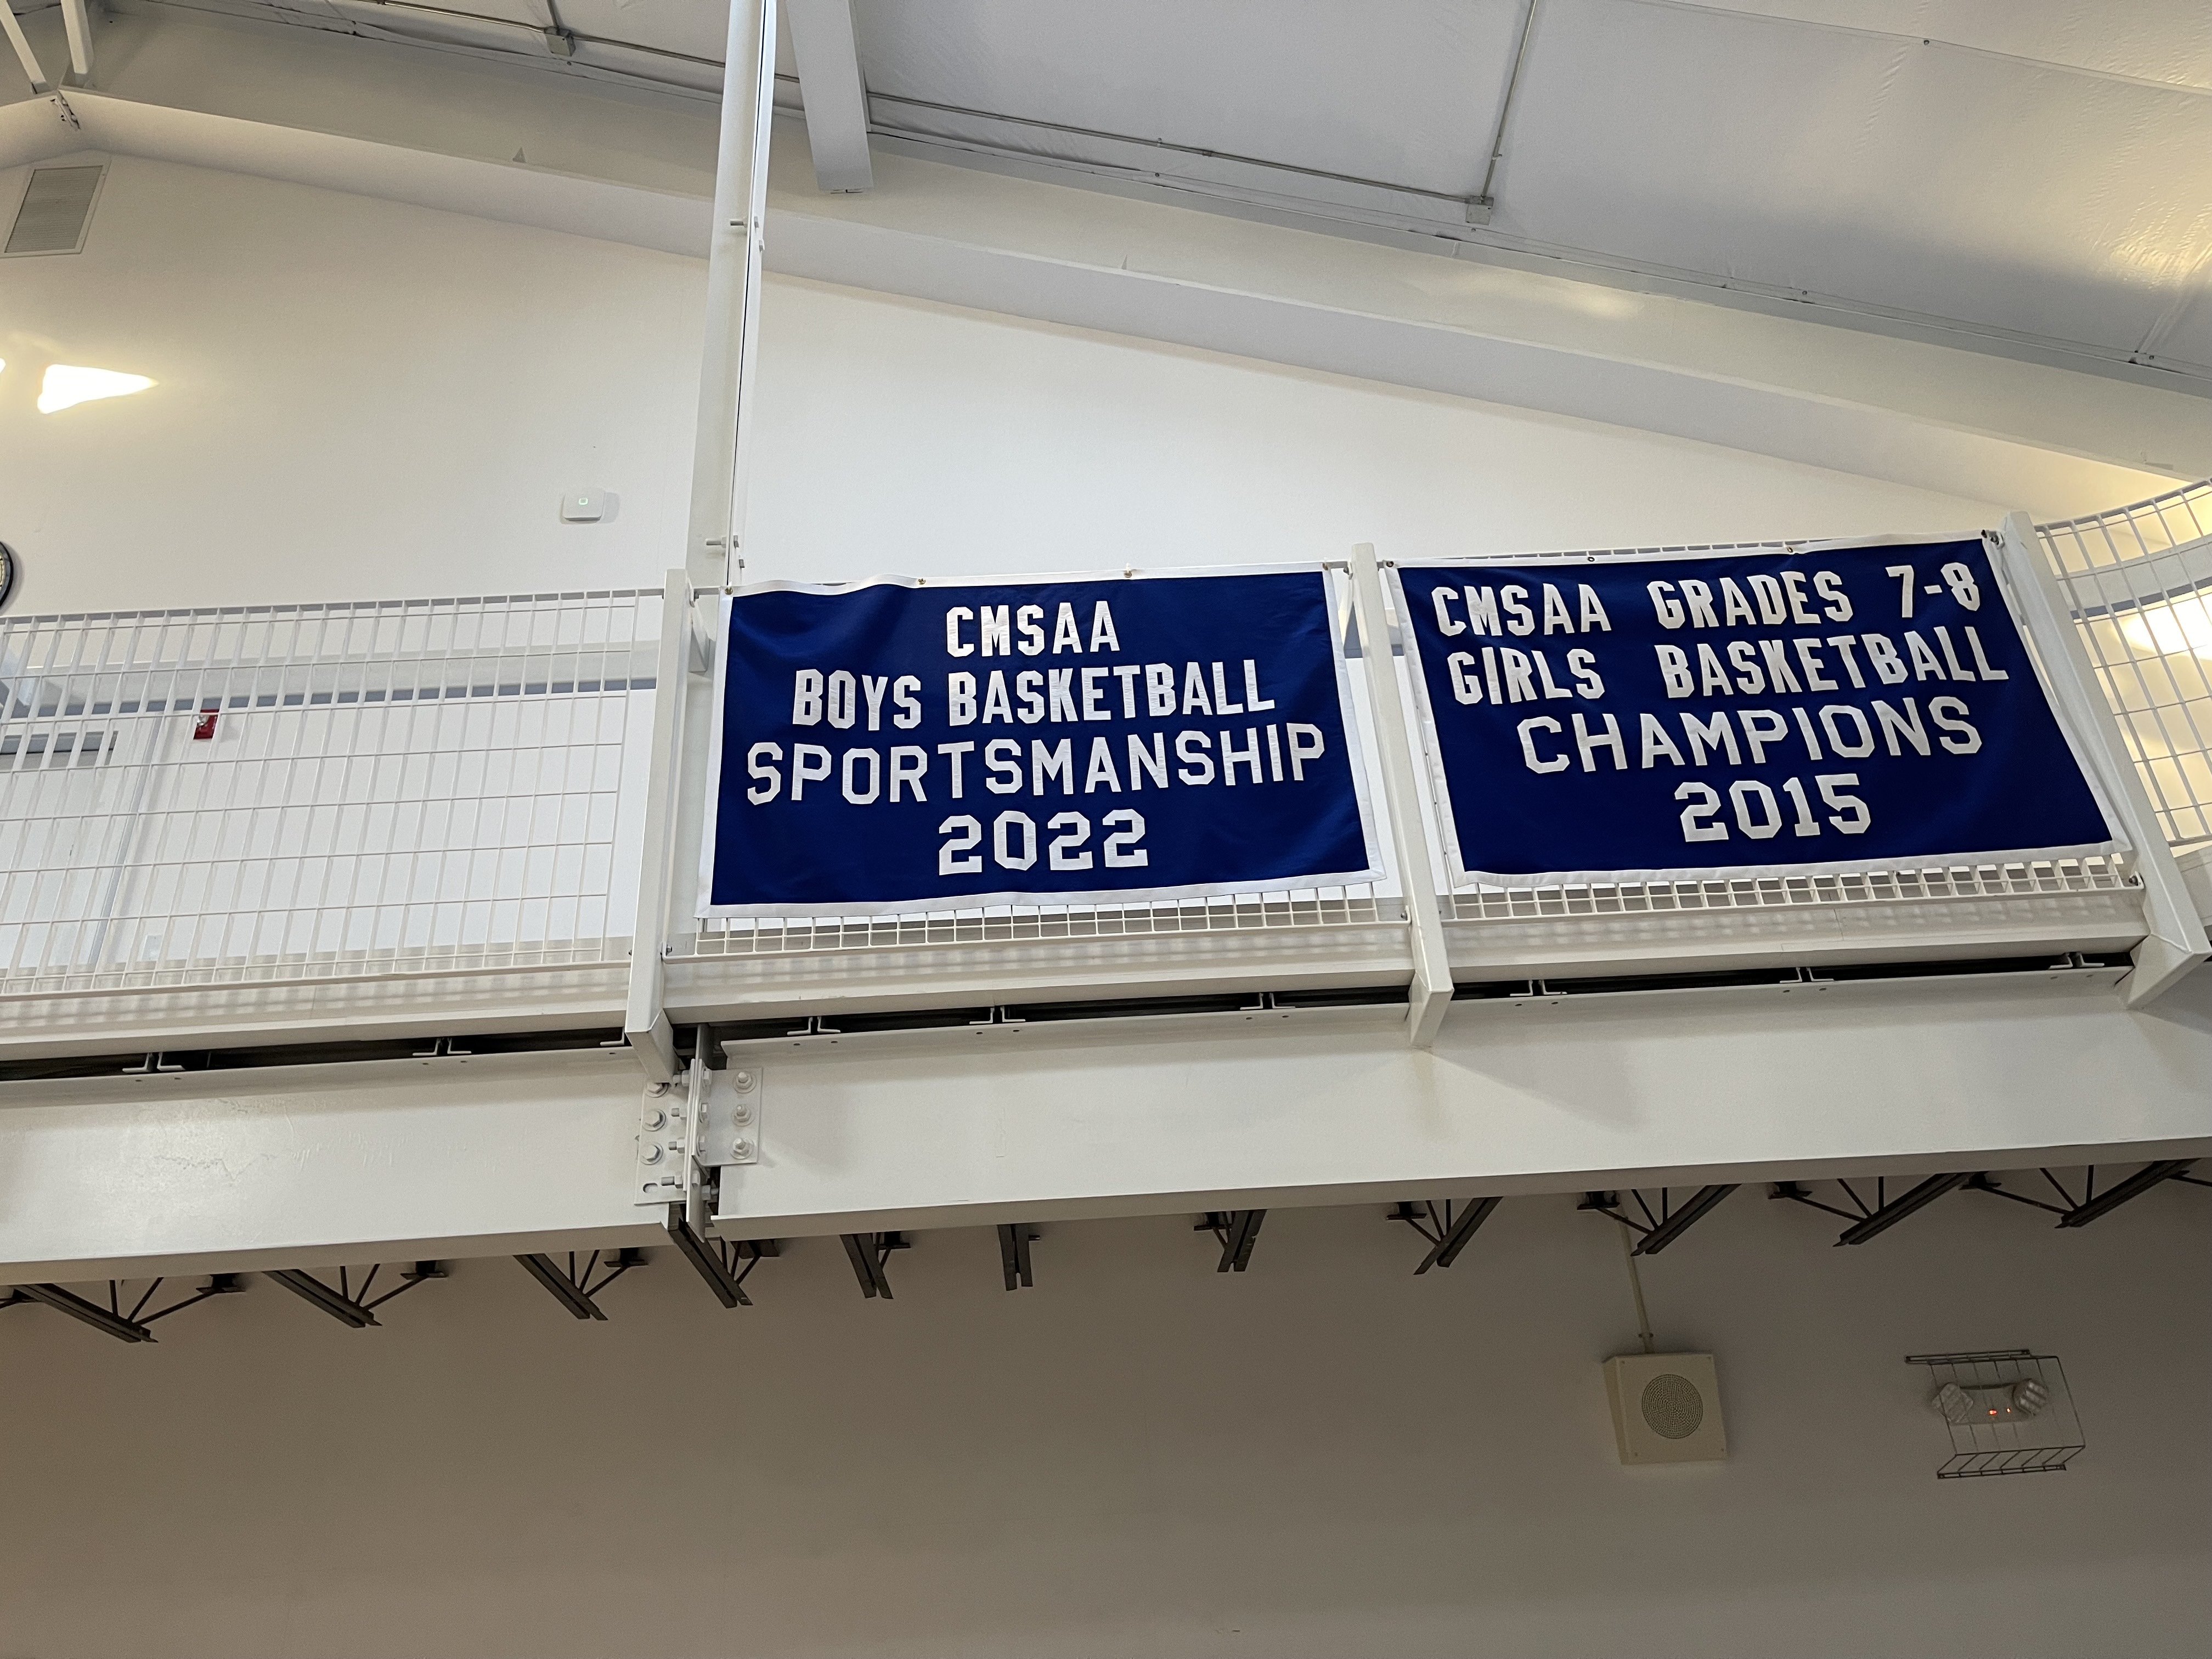 After finishing last season 9-1 the team was given the Sportsmanship Award banner, which only further motivated the team this season.